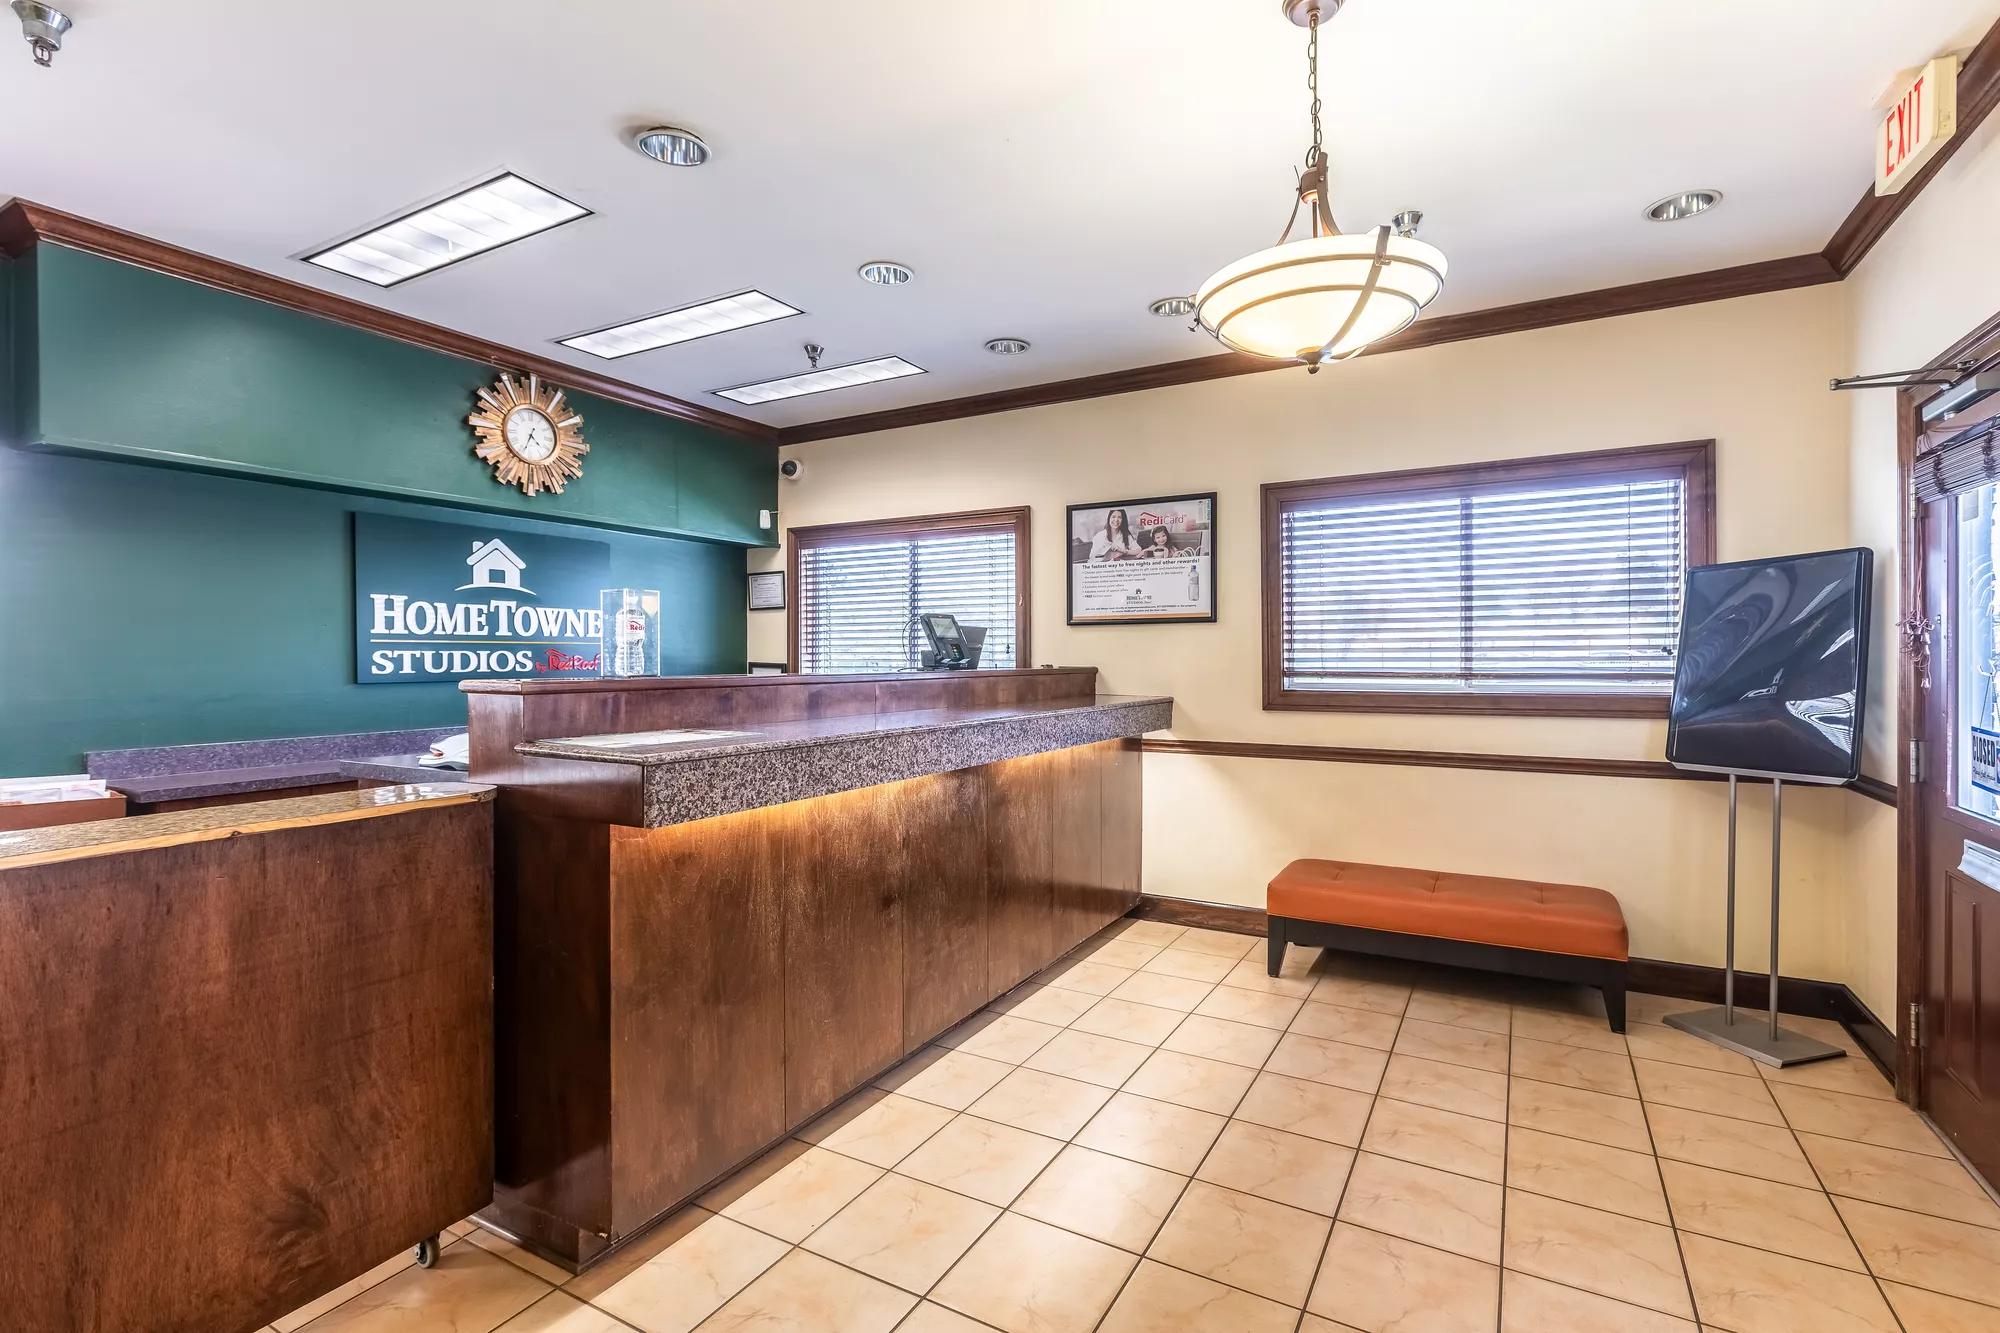 HomeTowne Studios Gainesville, GA Front Desk and Lobby 